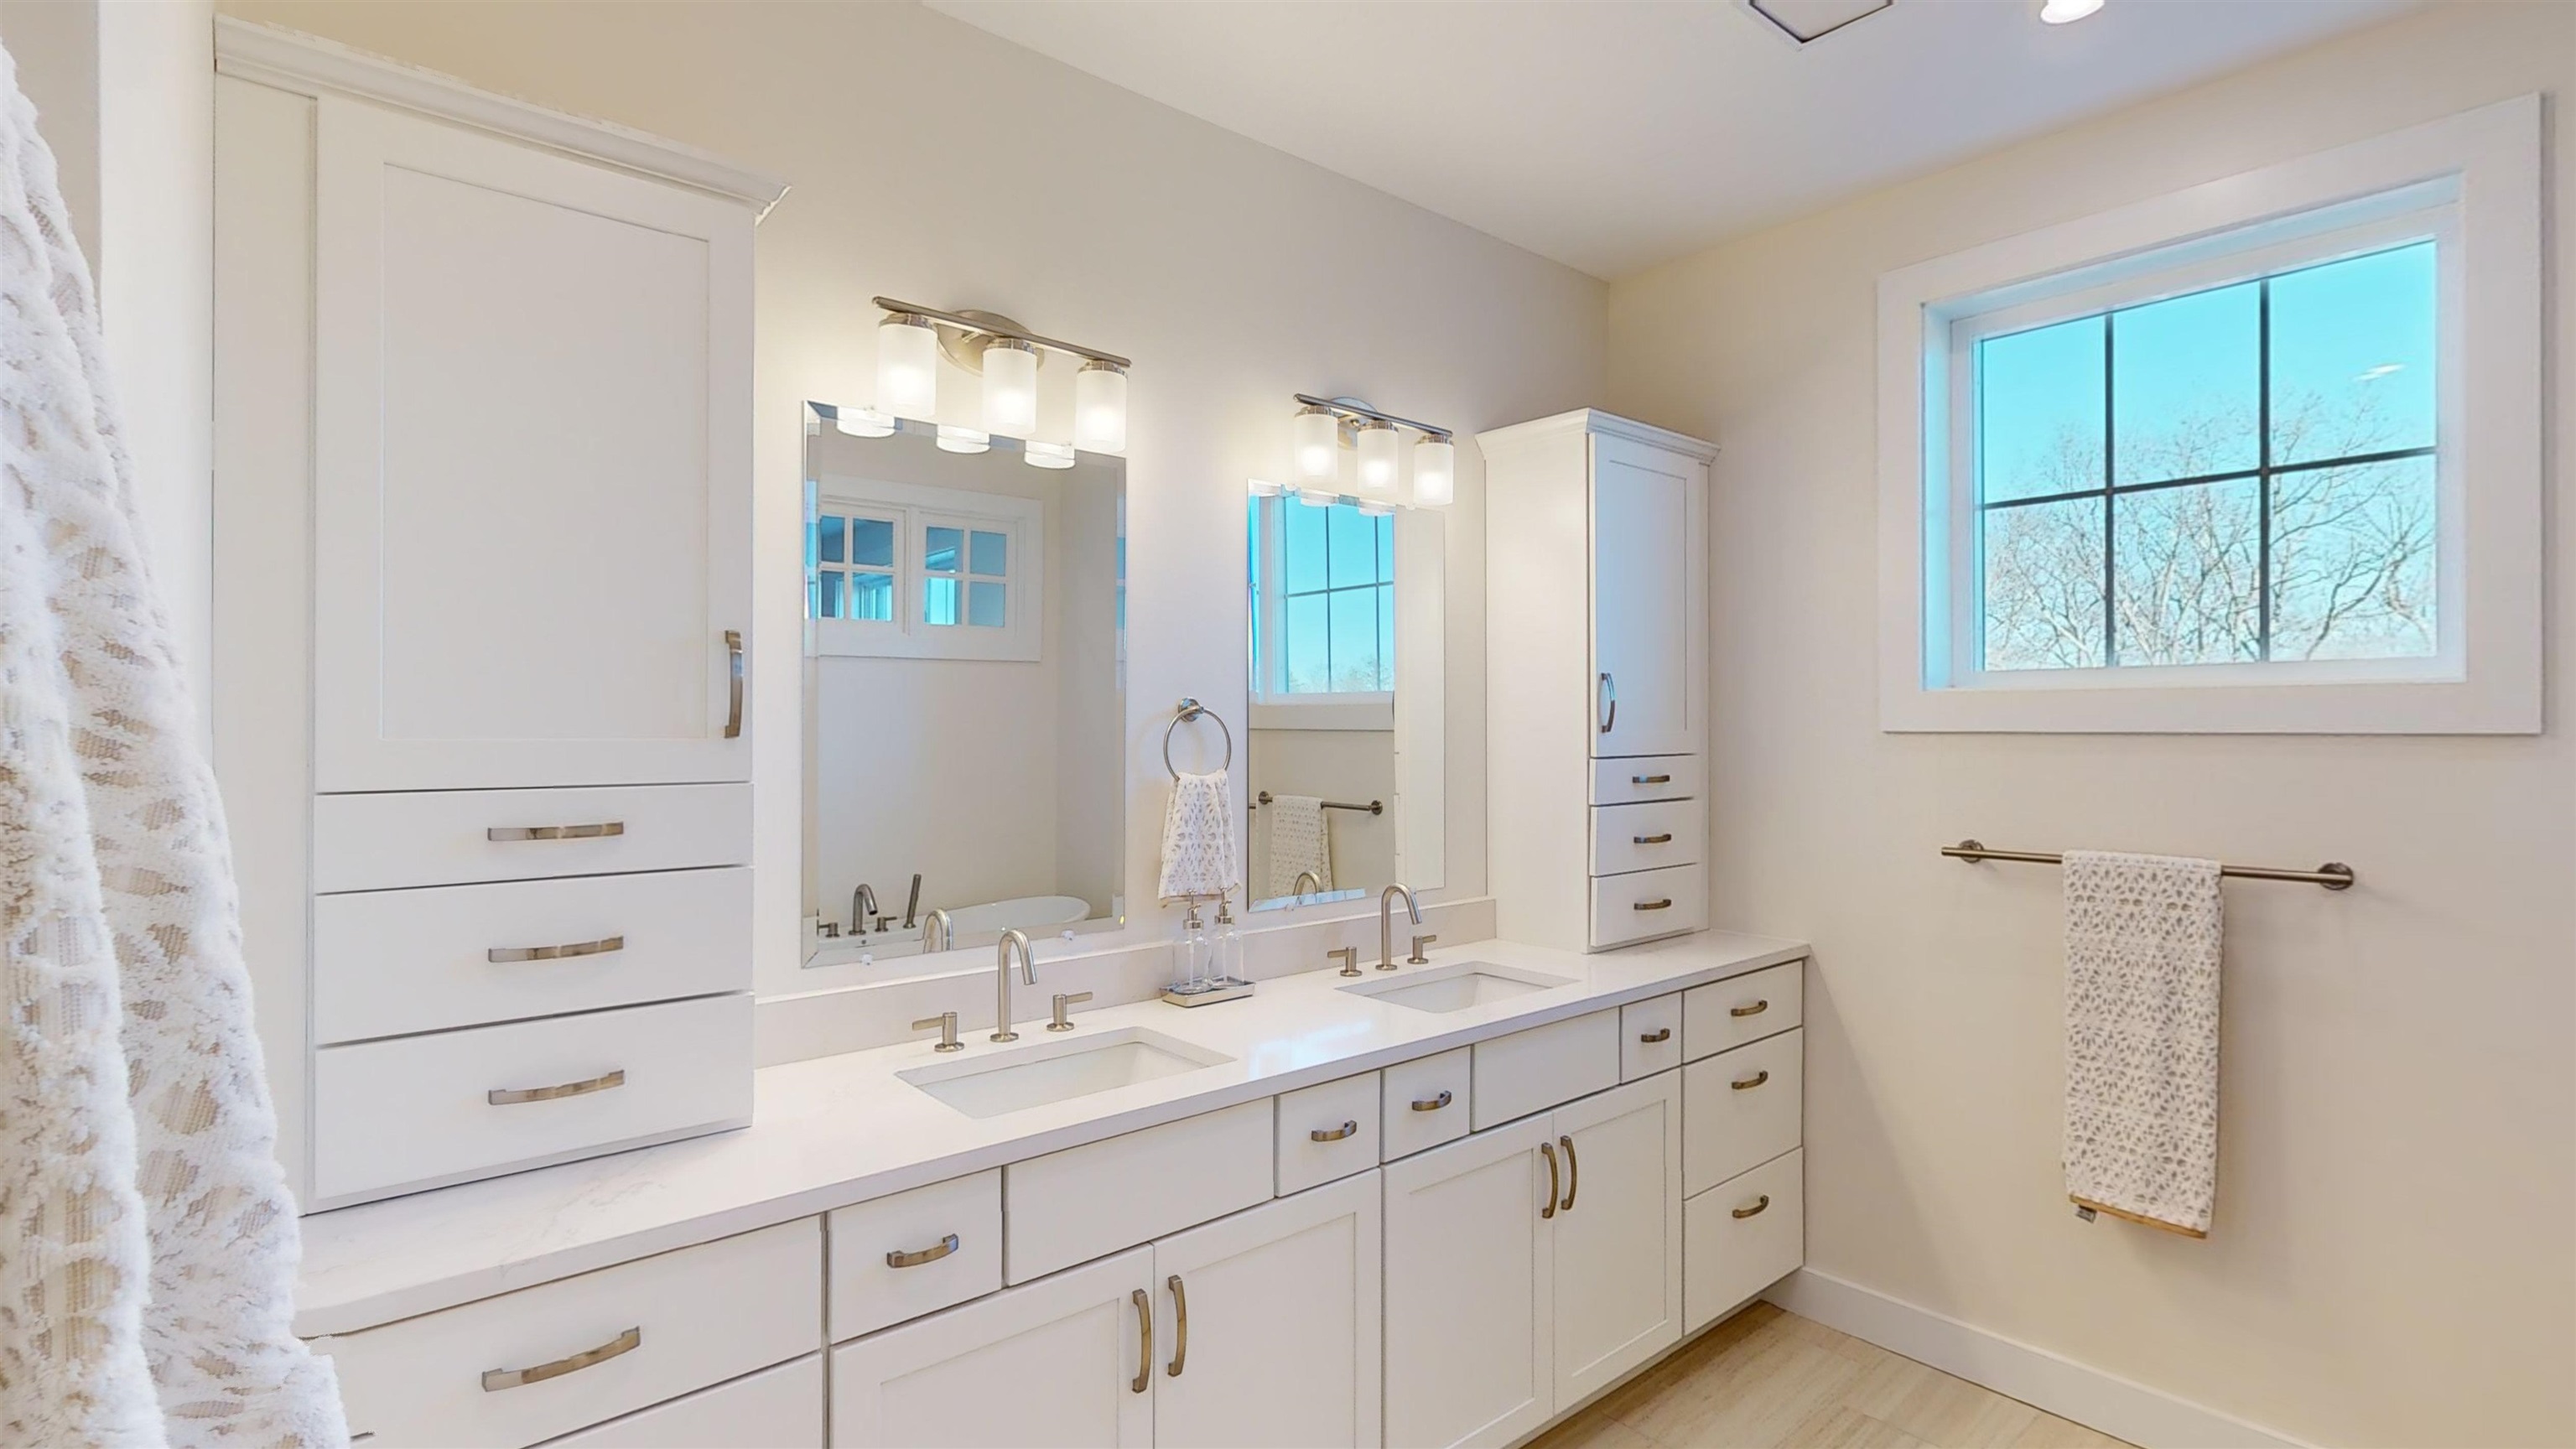 DOUBLE VANITY WITH CABINETS GALORE